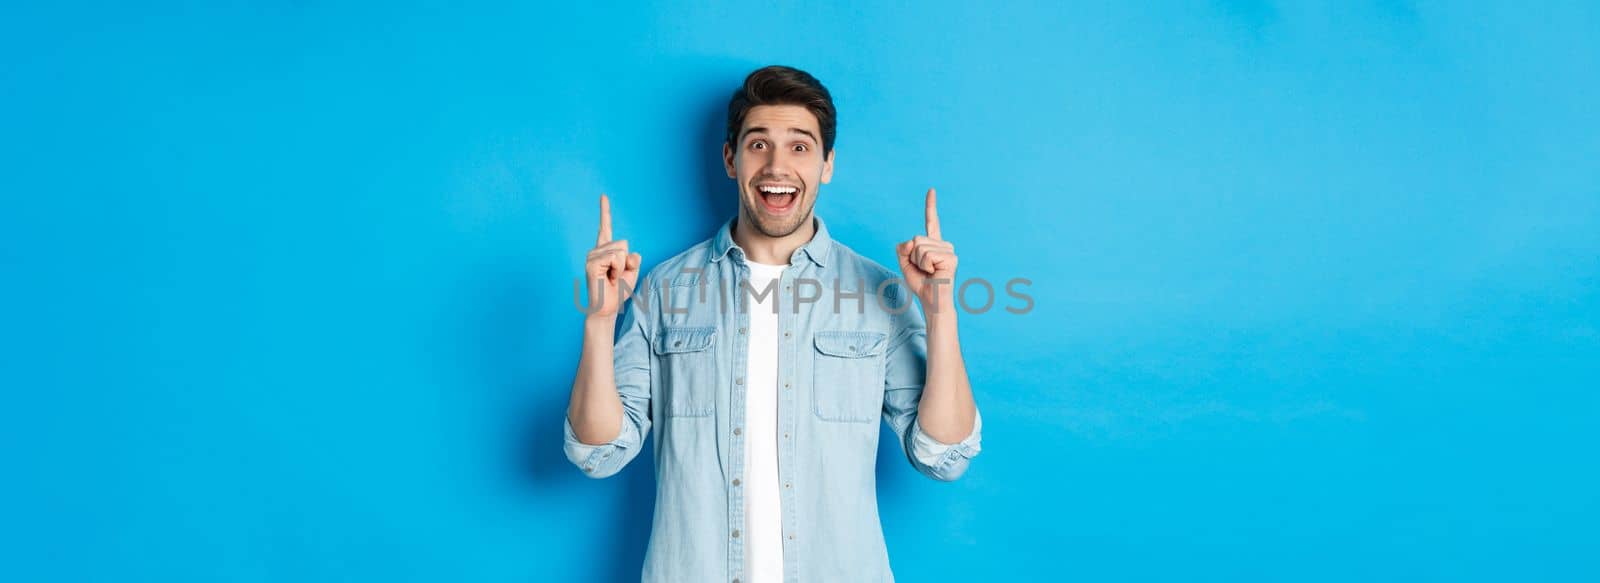 Portrait of happy 25s guy with beard, pointing fingers up and smiling, showing advertisement, standing against blue background.